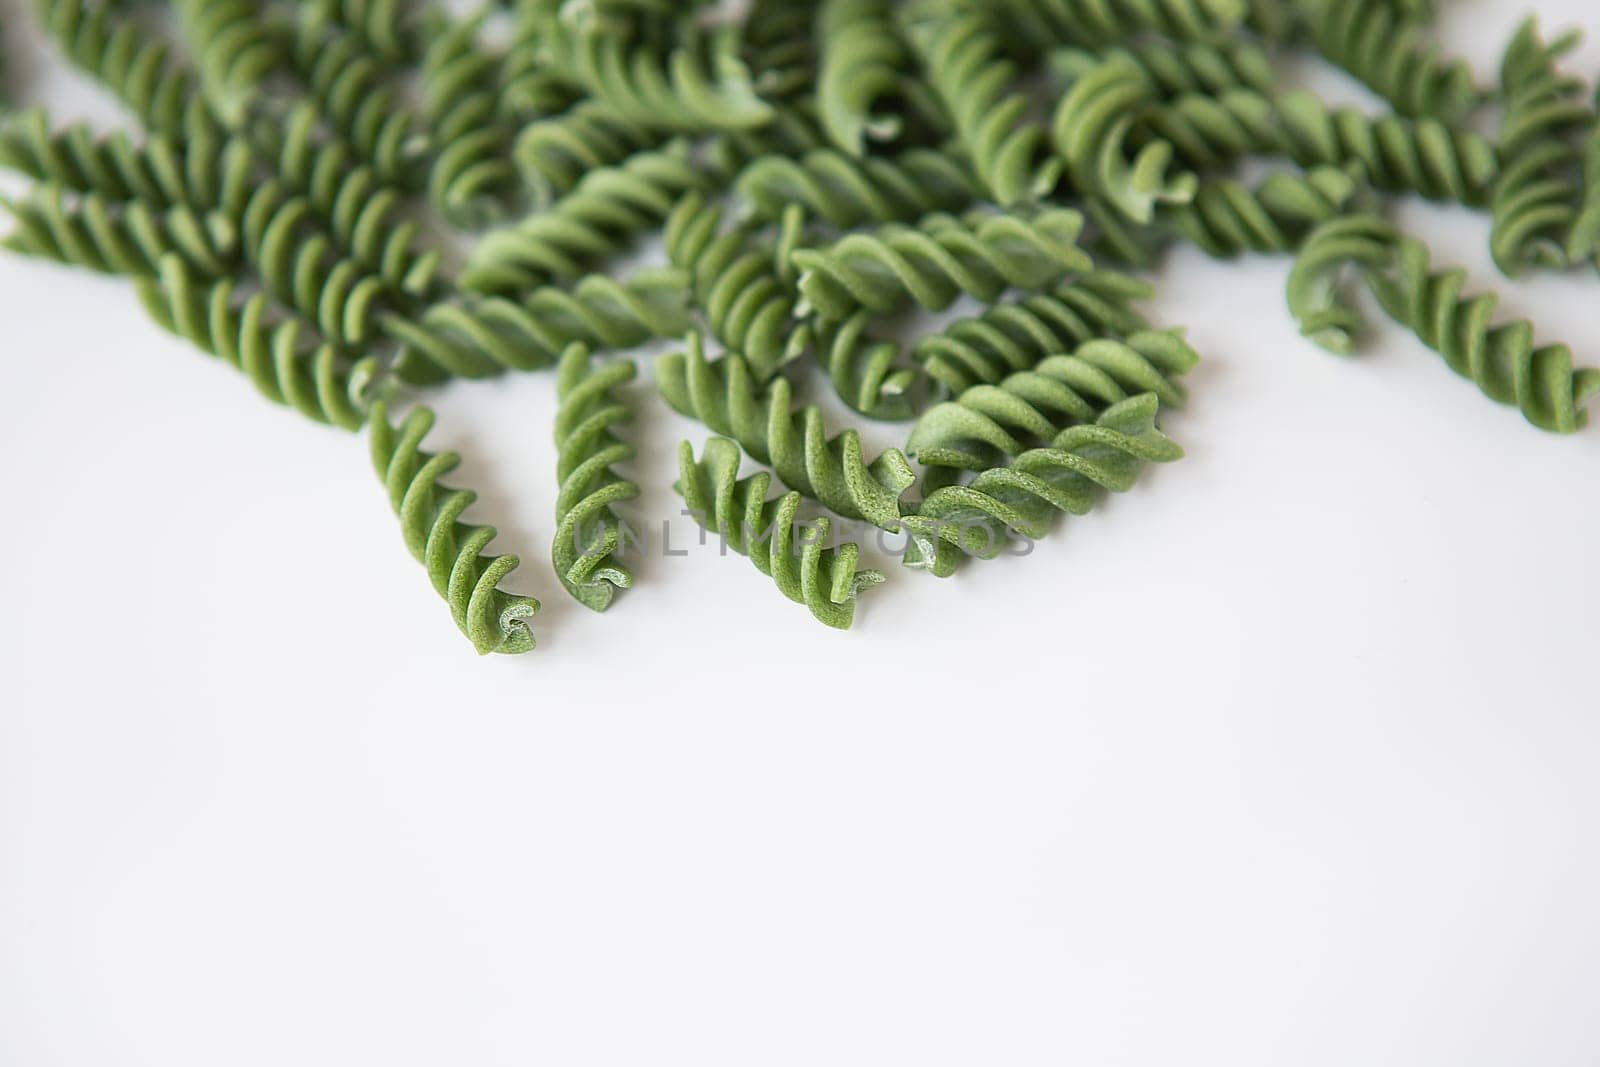 Raw green fusilli pasta, natural based on spinach and spirulina. Delicious and healthy food